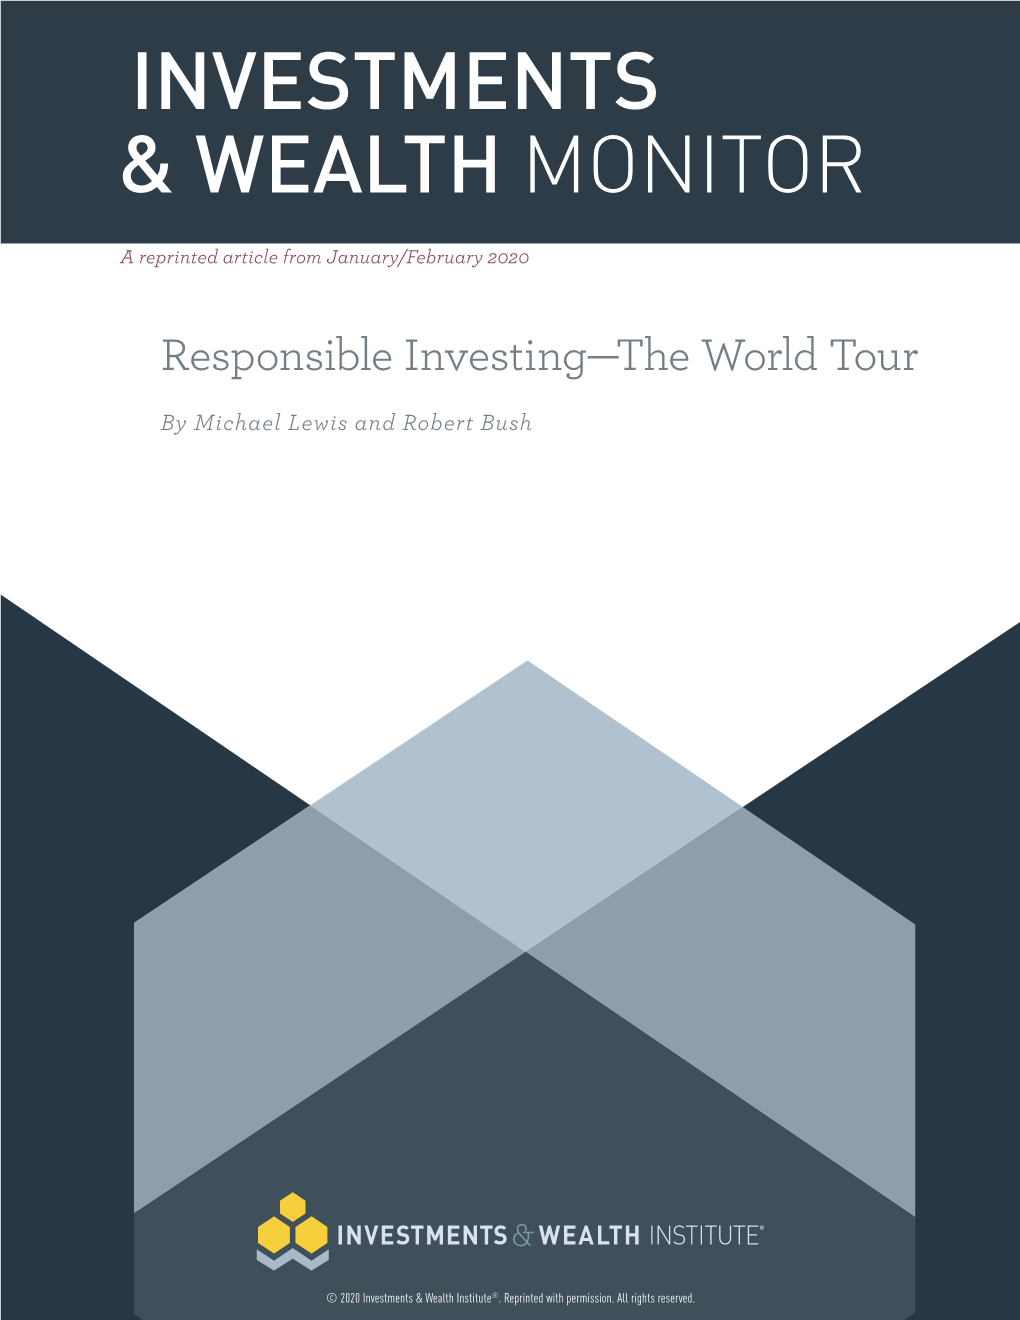 Responsible Investing—The World Tour